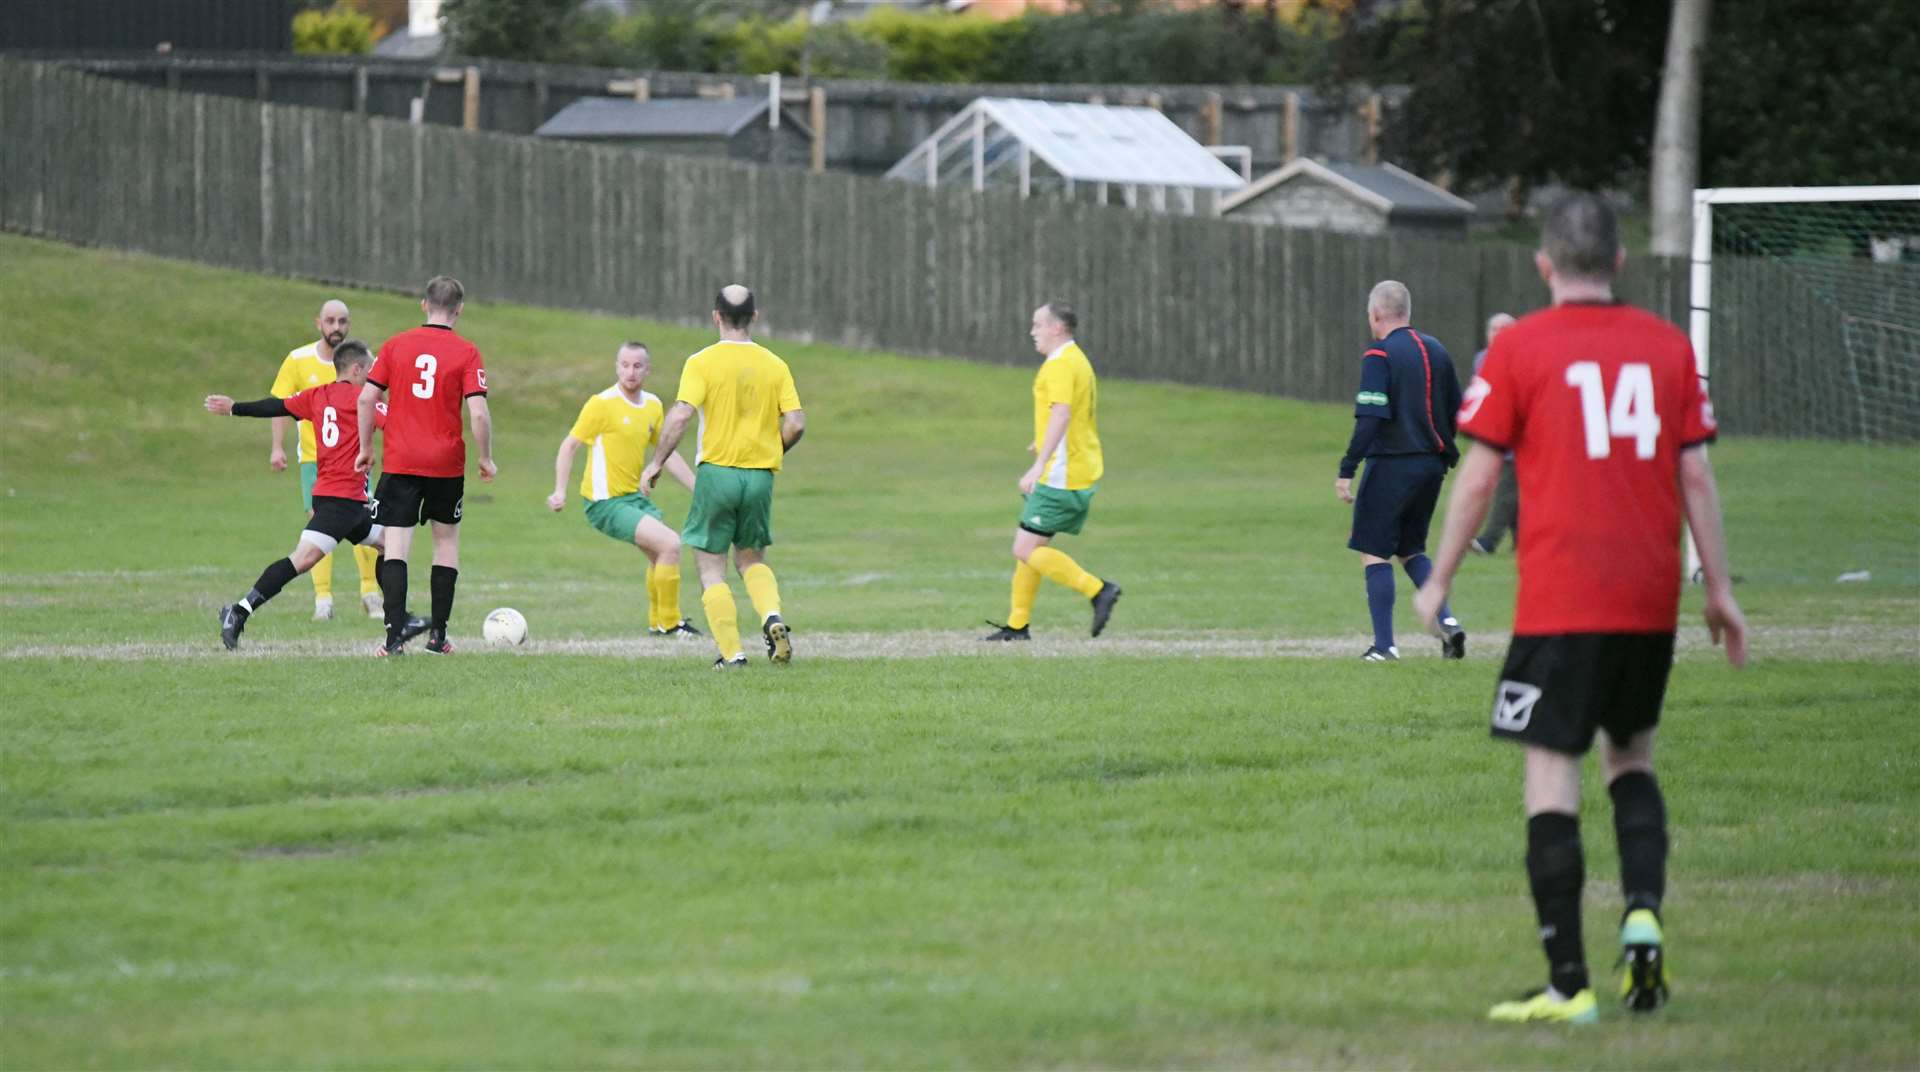 Gary Burchell scored a hat-trick for FC Fochabers. Picture: Beth Taylor.